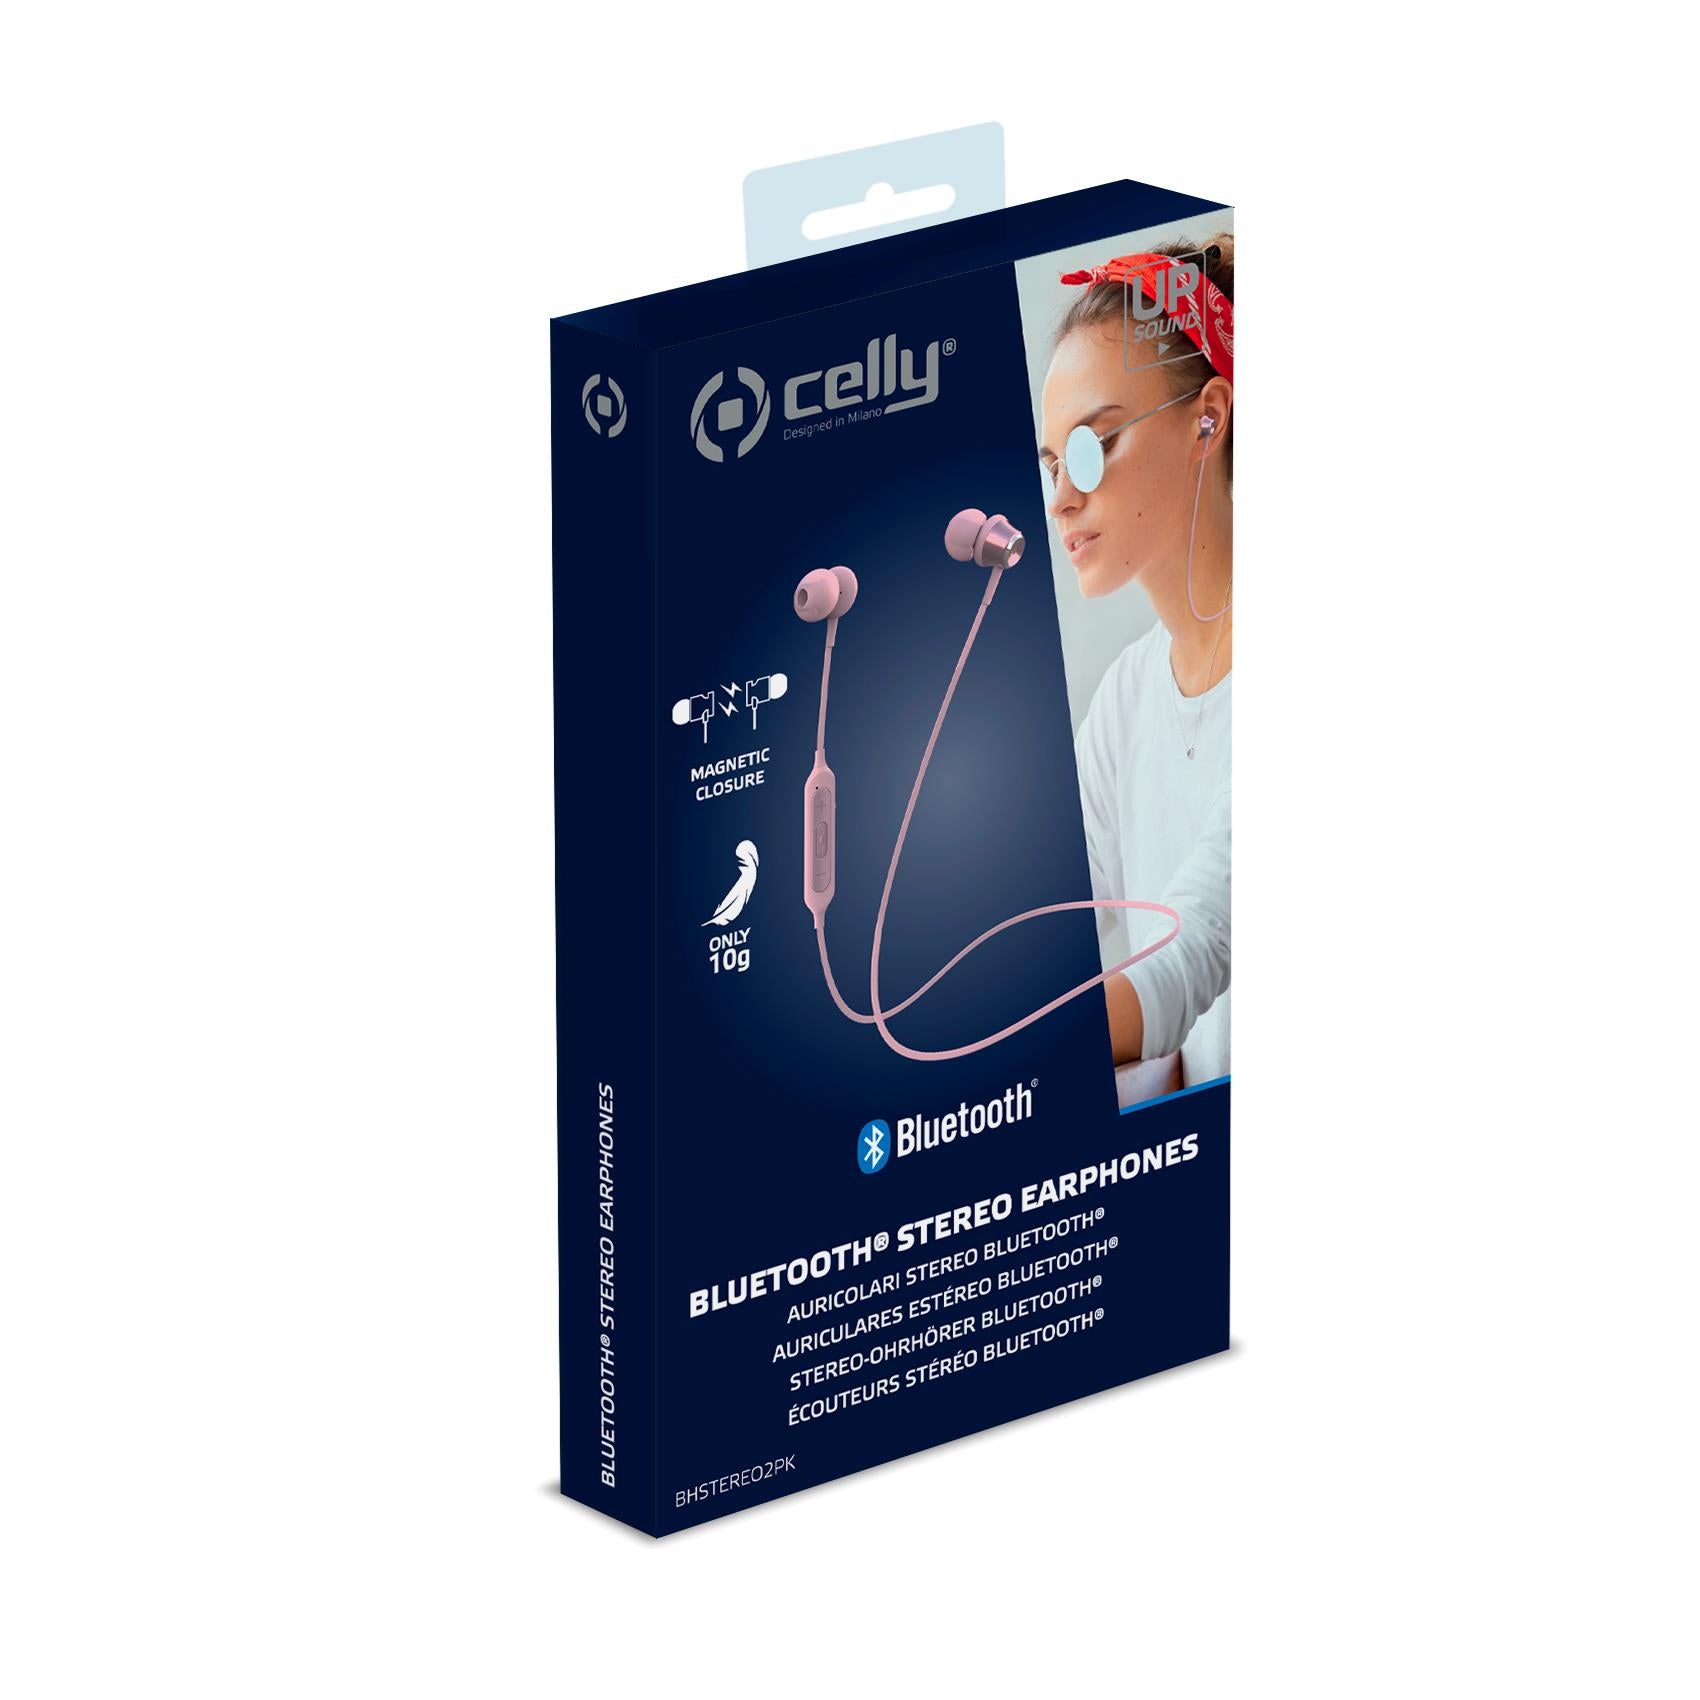 Celly BHSTEREO2 - Stereo Bluetooth Earphones